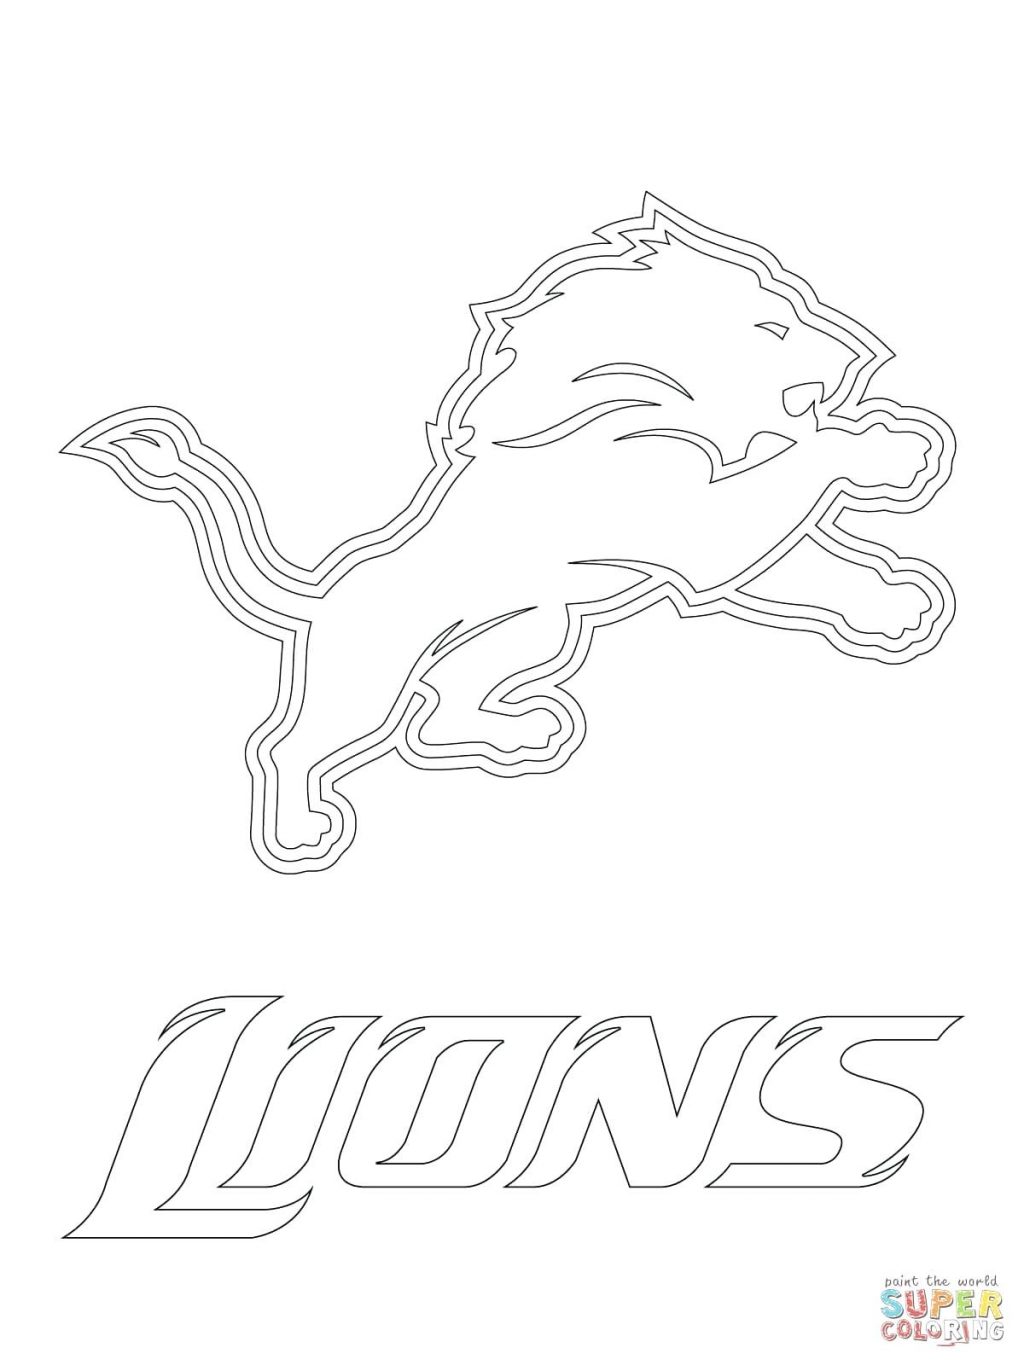 lions-football-coloring-pages-at-getcolorings-free-printable-colorings-pages-to-print-and